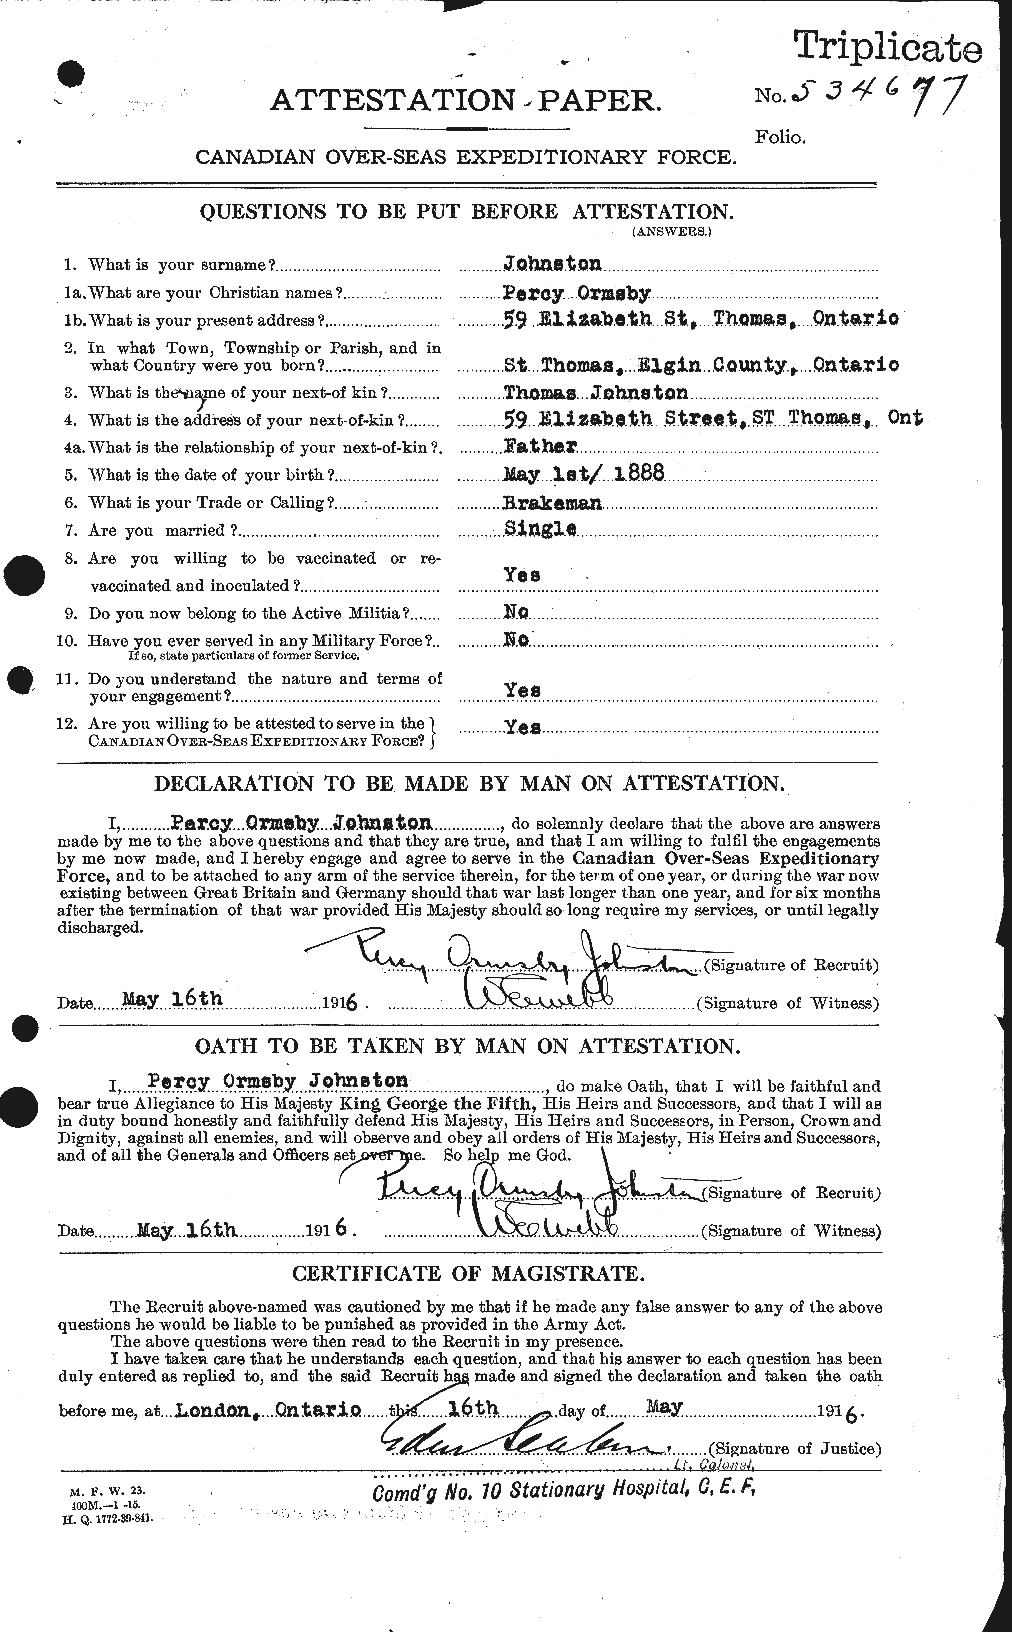 Personnel Records of the First World War - CEF 423032a